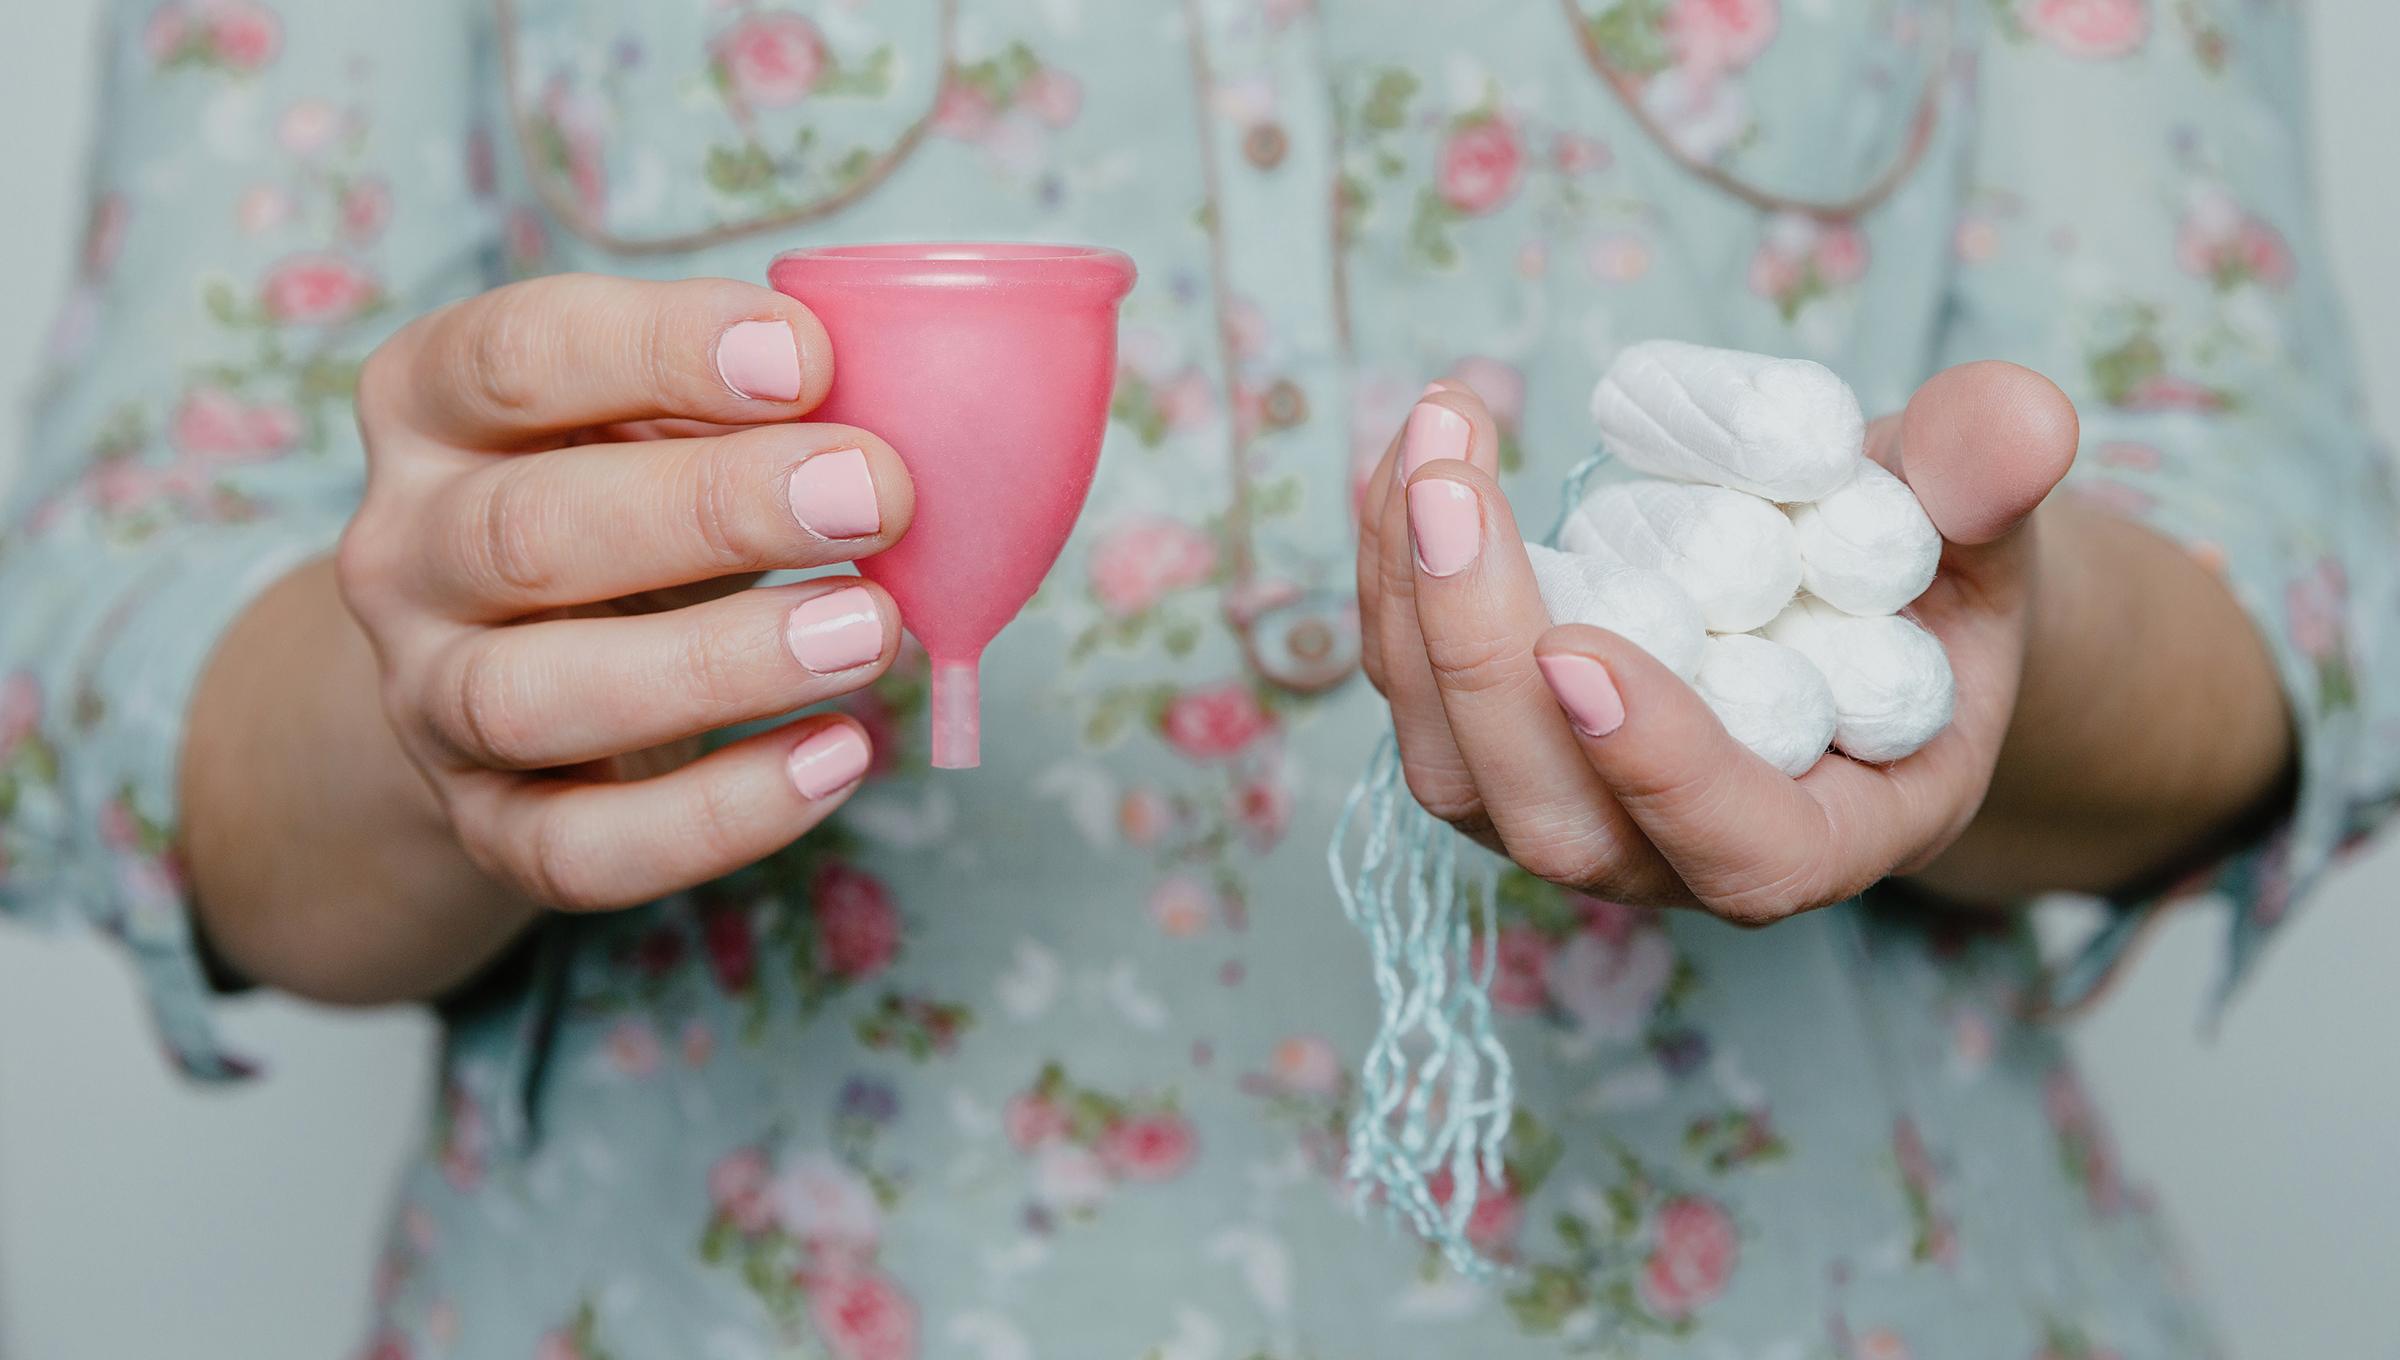 Toxic Shock Syndrome Is Rare. Hereâ€™s What Tampon Users Should Know